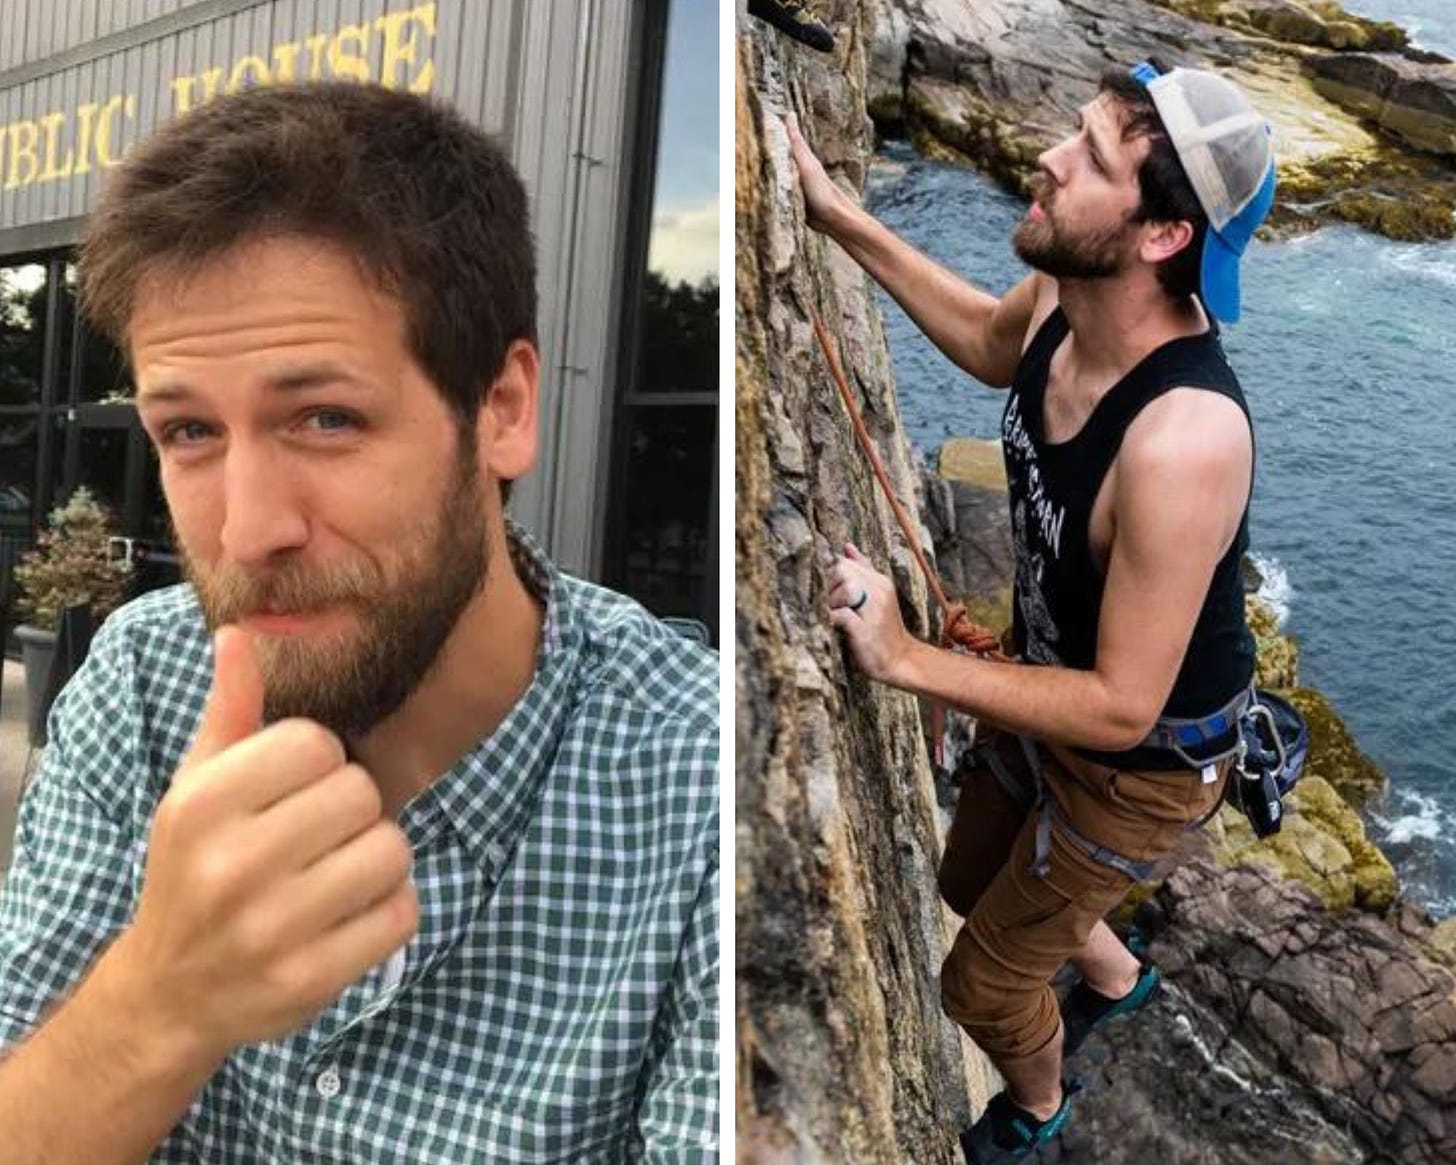 A photo collage of Adam Melfa. In the photo on the left, he smiles at the viewer and gives a thumb’s up. He has short dark brown hair, sideburns, and a closely cropped beard and mustache. He has blue eyes and wears a green checked button-down shirt. In the photo on the right, Adam is wearing a black tank top, brown shorts, and a blue backward baseball cap. He is rock climbing on a cliff and is facing left towards the rock wall. Behind him are more cliffs and a body of water. He looks deep in thought. 